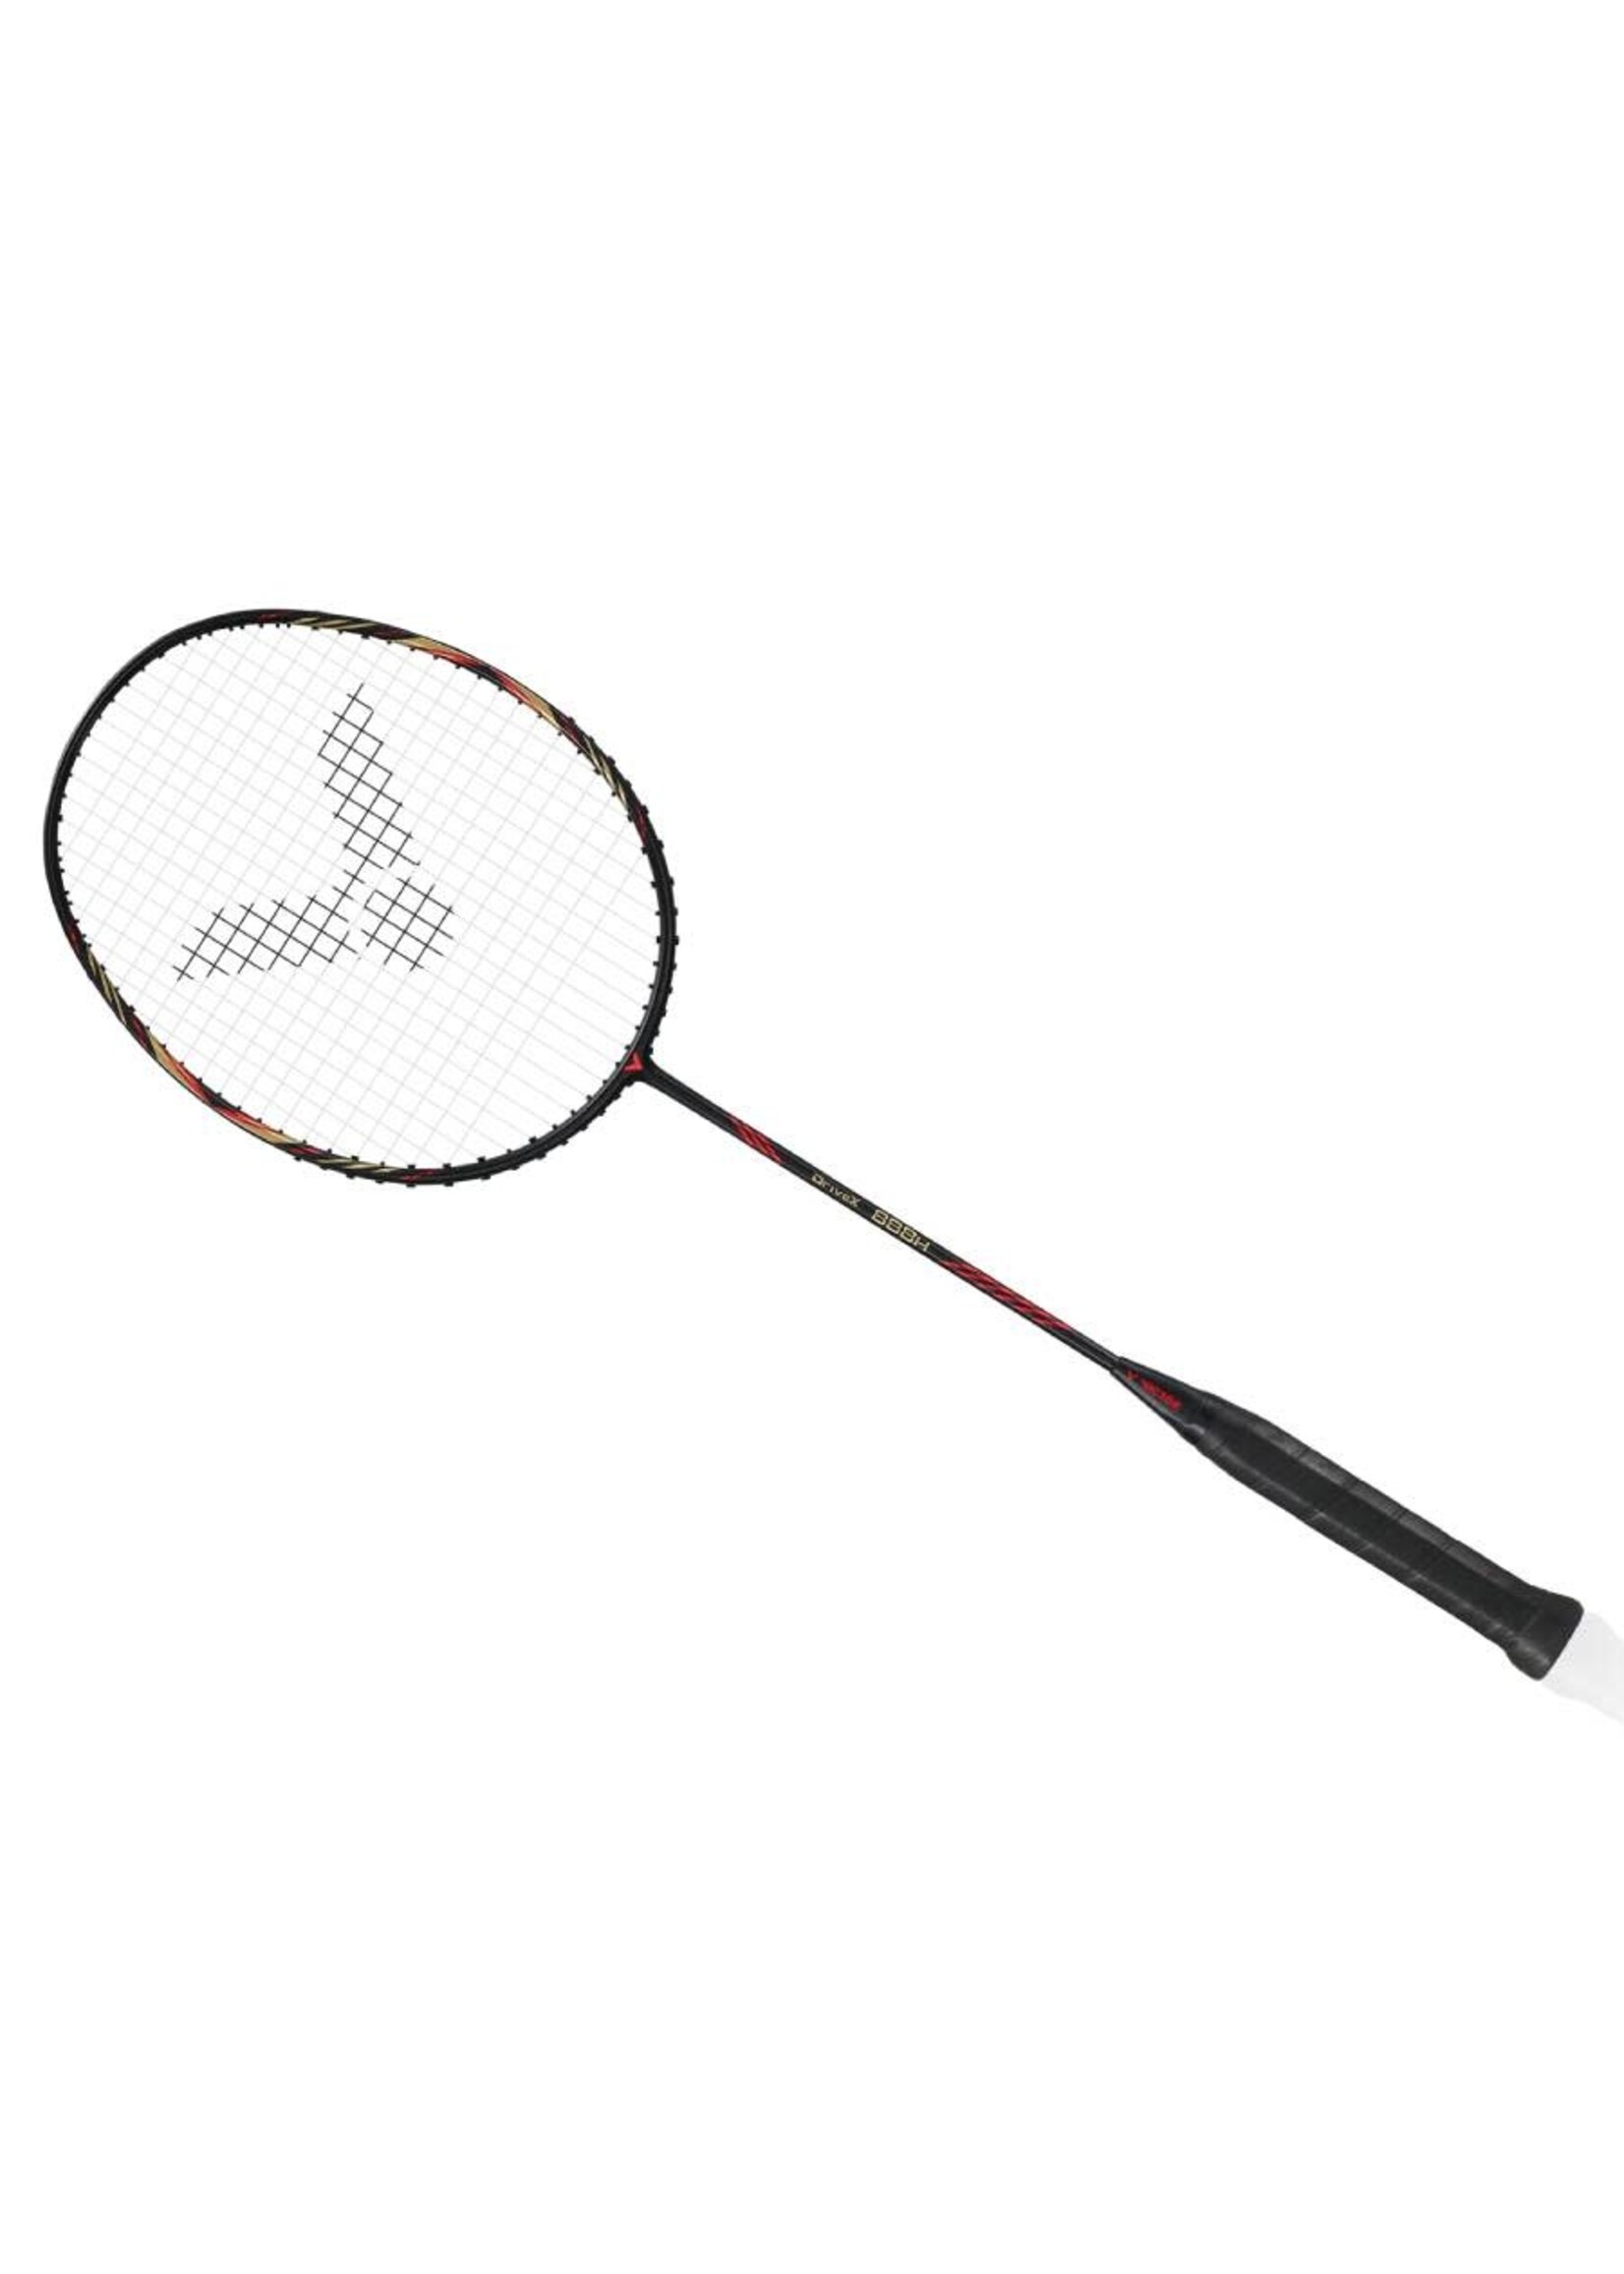 VICTOR VICTOR RACQUET DRIVEX 888H GRAPHITE FRAME